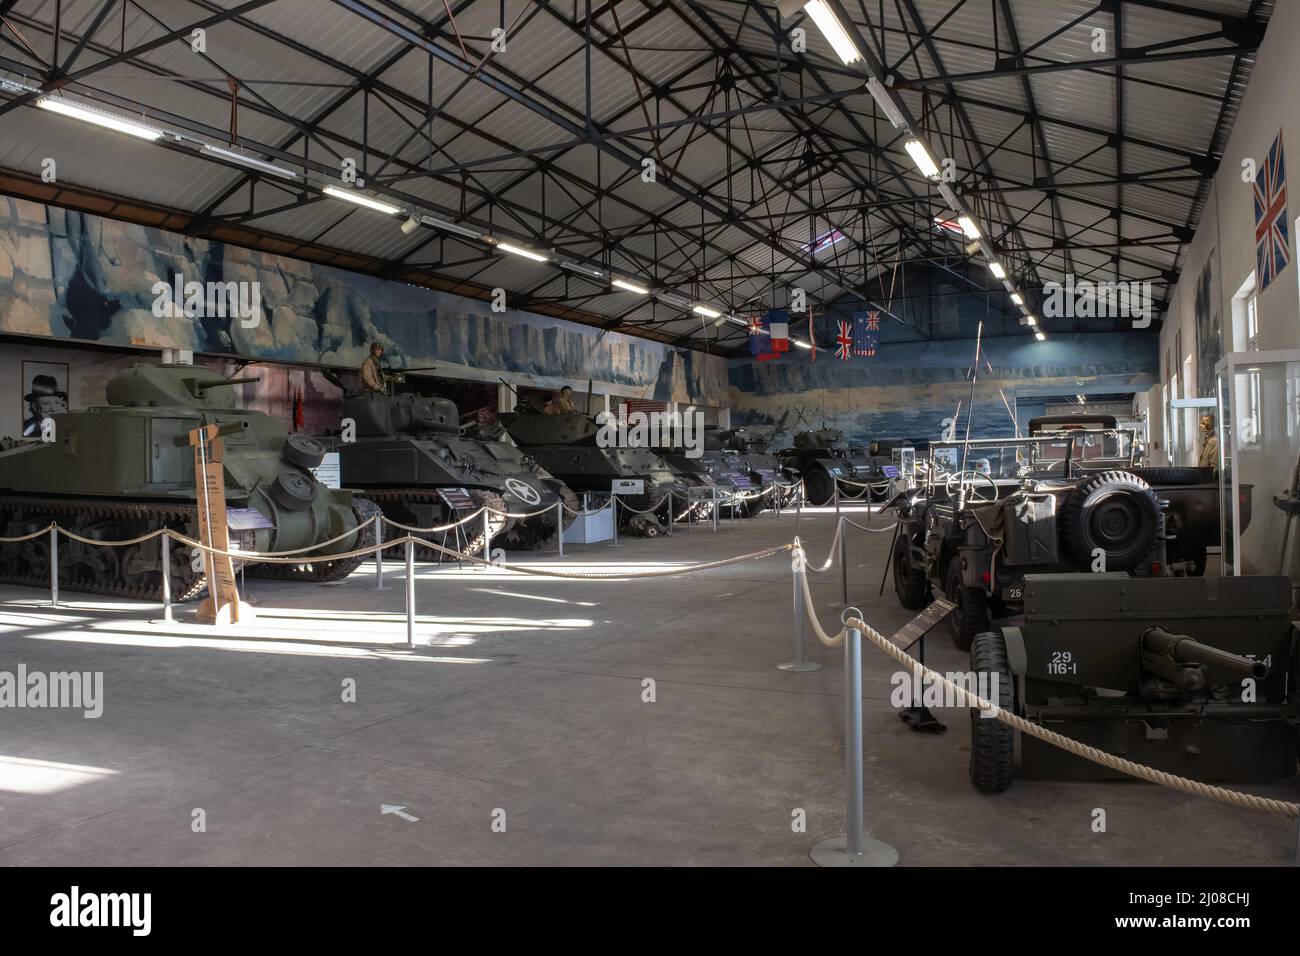 Saumur, France - February 26, 2022:  Allies armoured vehicles and weapons at the tank museum in Saumur (Musee des Blindes). Second world war exhibitio Stock Photo